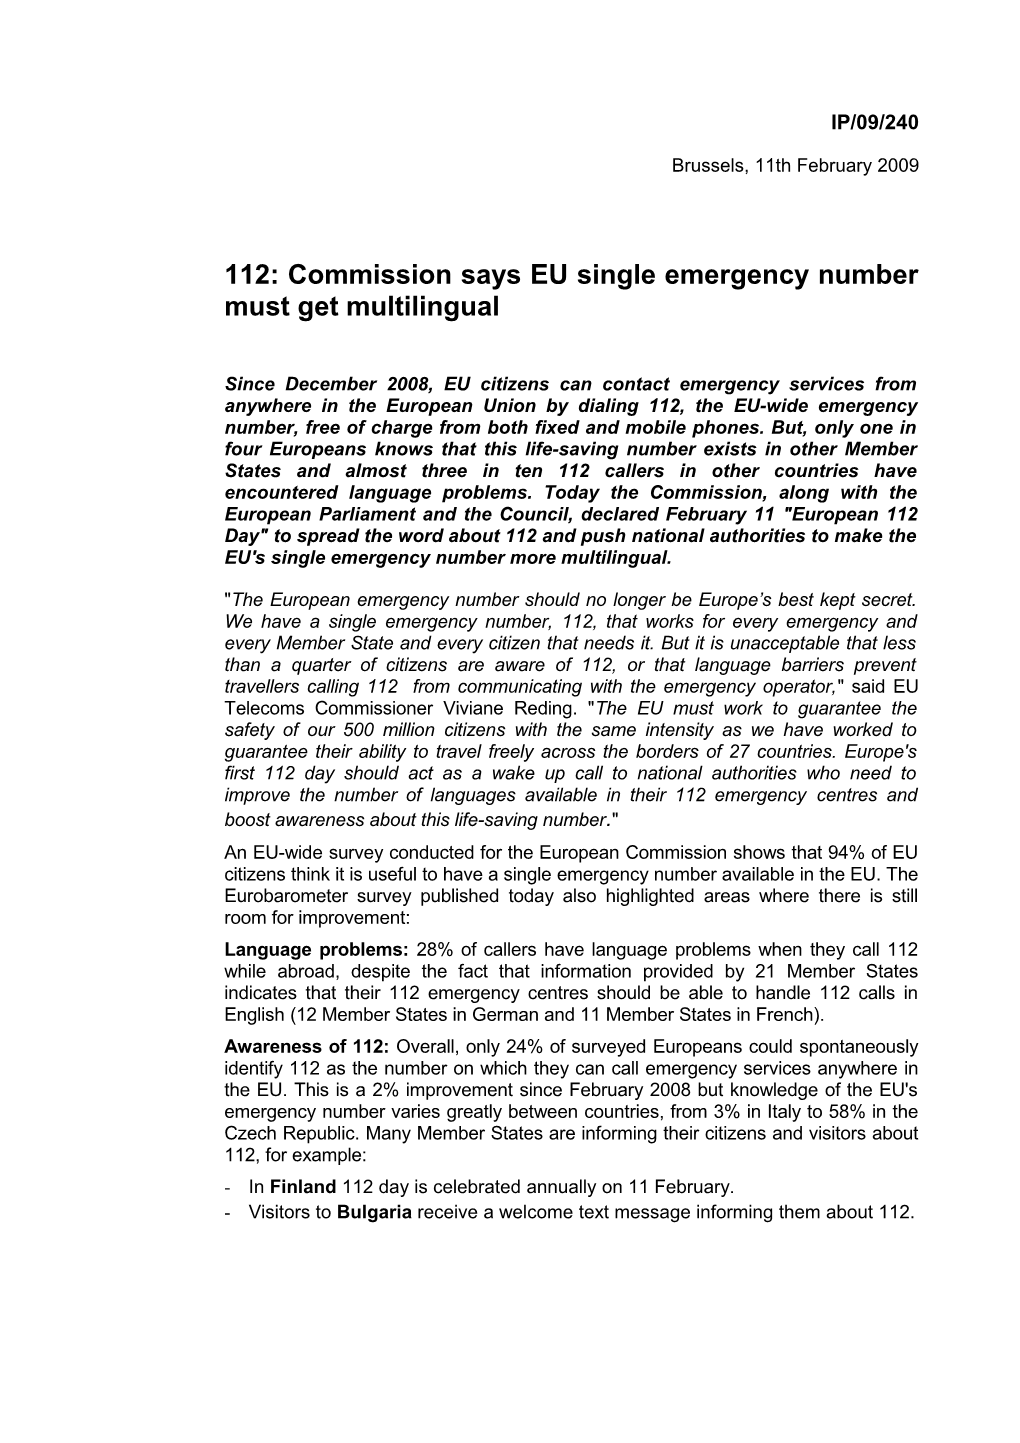 112: Commissionsays EU Single Emergency Number Must Get Multilingual